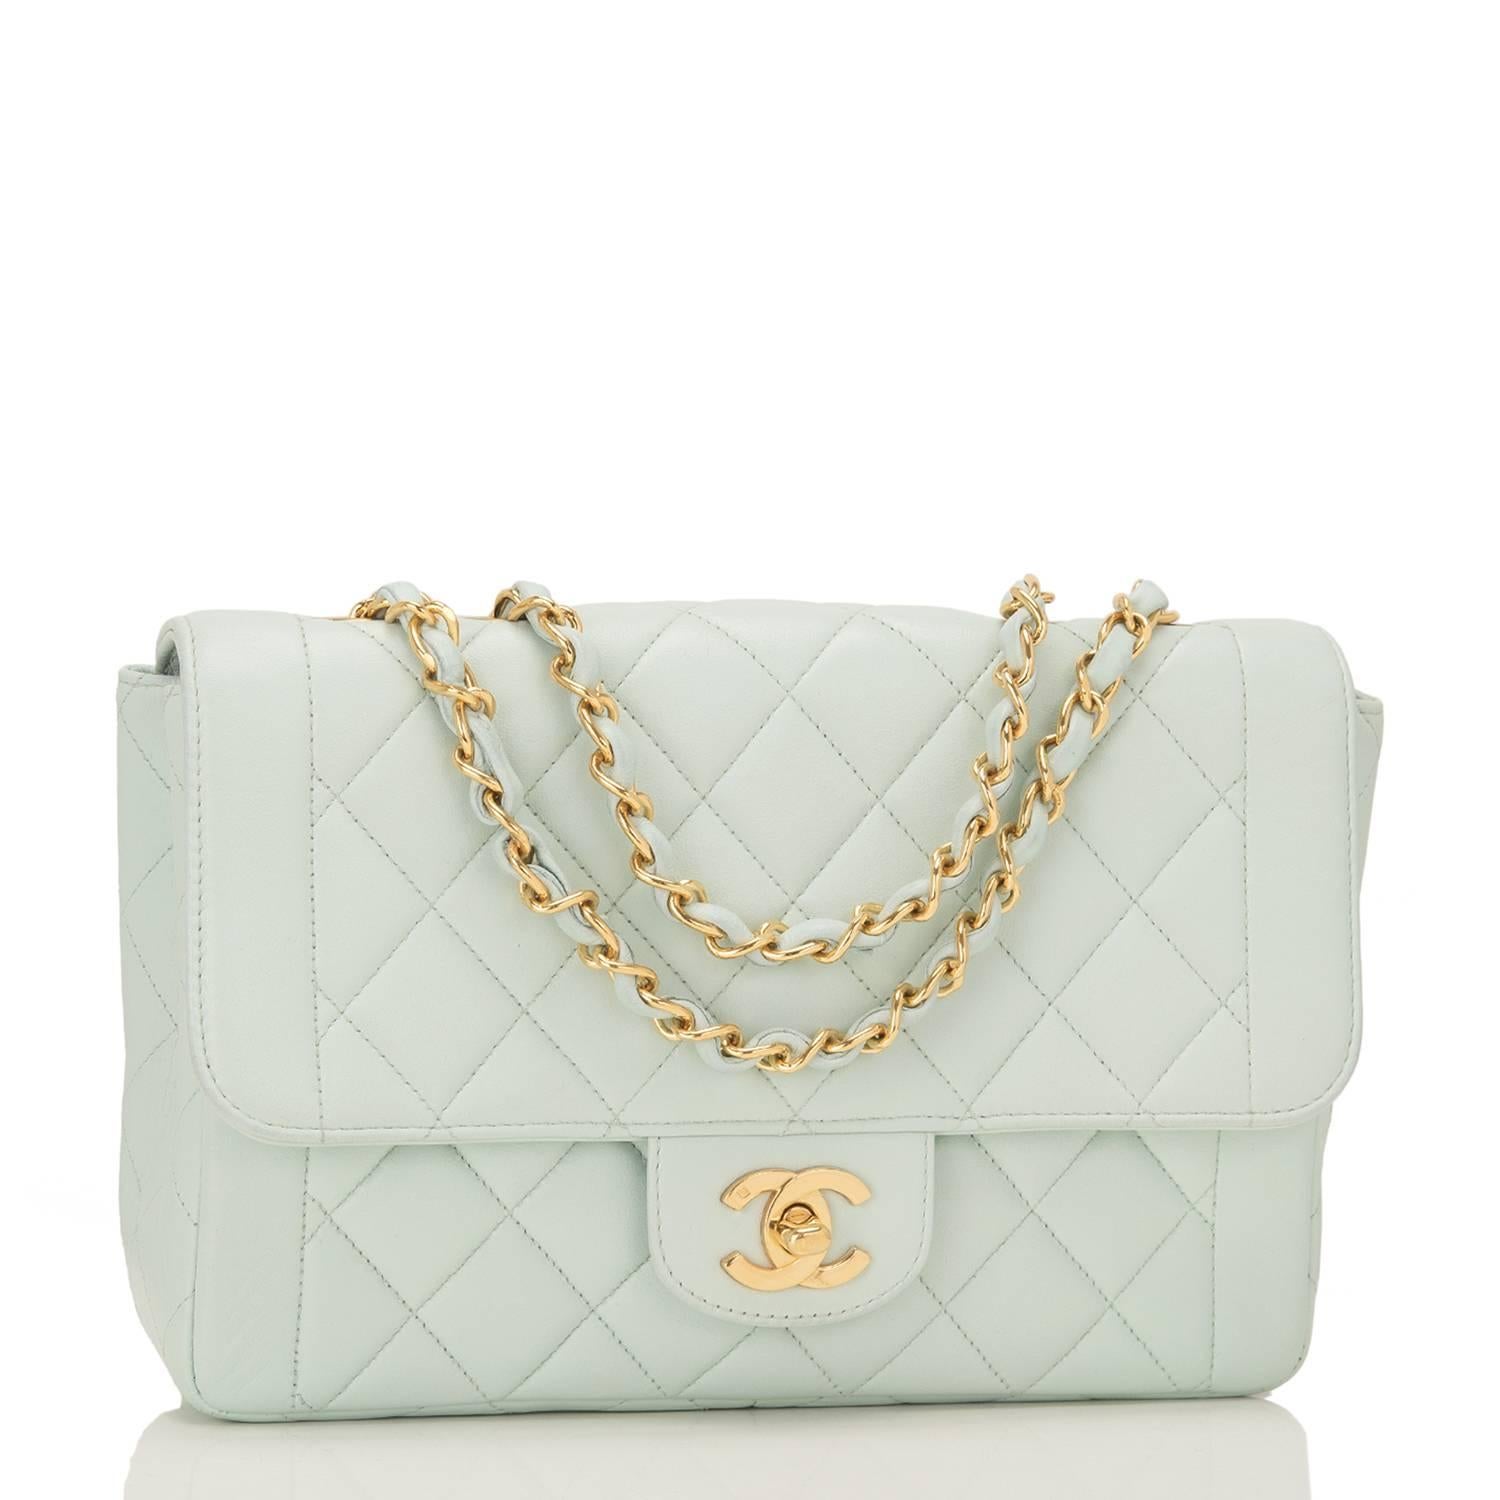 Chanel vintage flap bag of light turquoise lambskin leather with gold plated hardware.

This bag features a front flap with CC turnlock closure and an interwoven gold plated chain link and turquoise leather shoulder strap.

The interior is lined